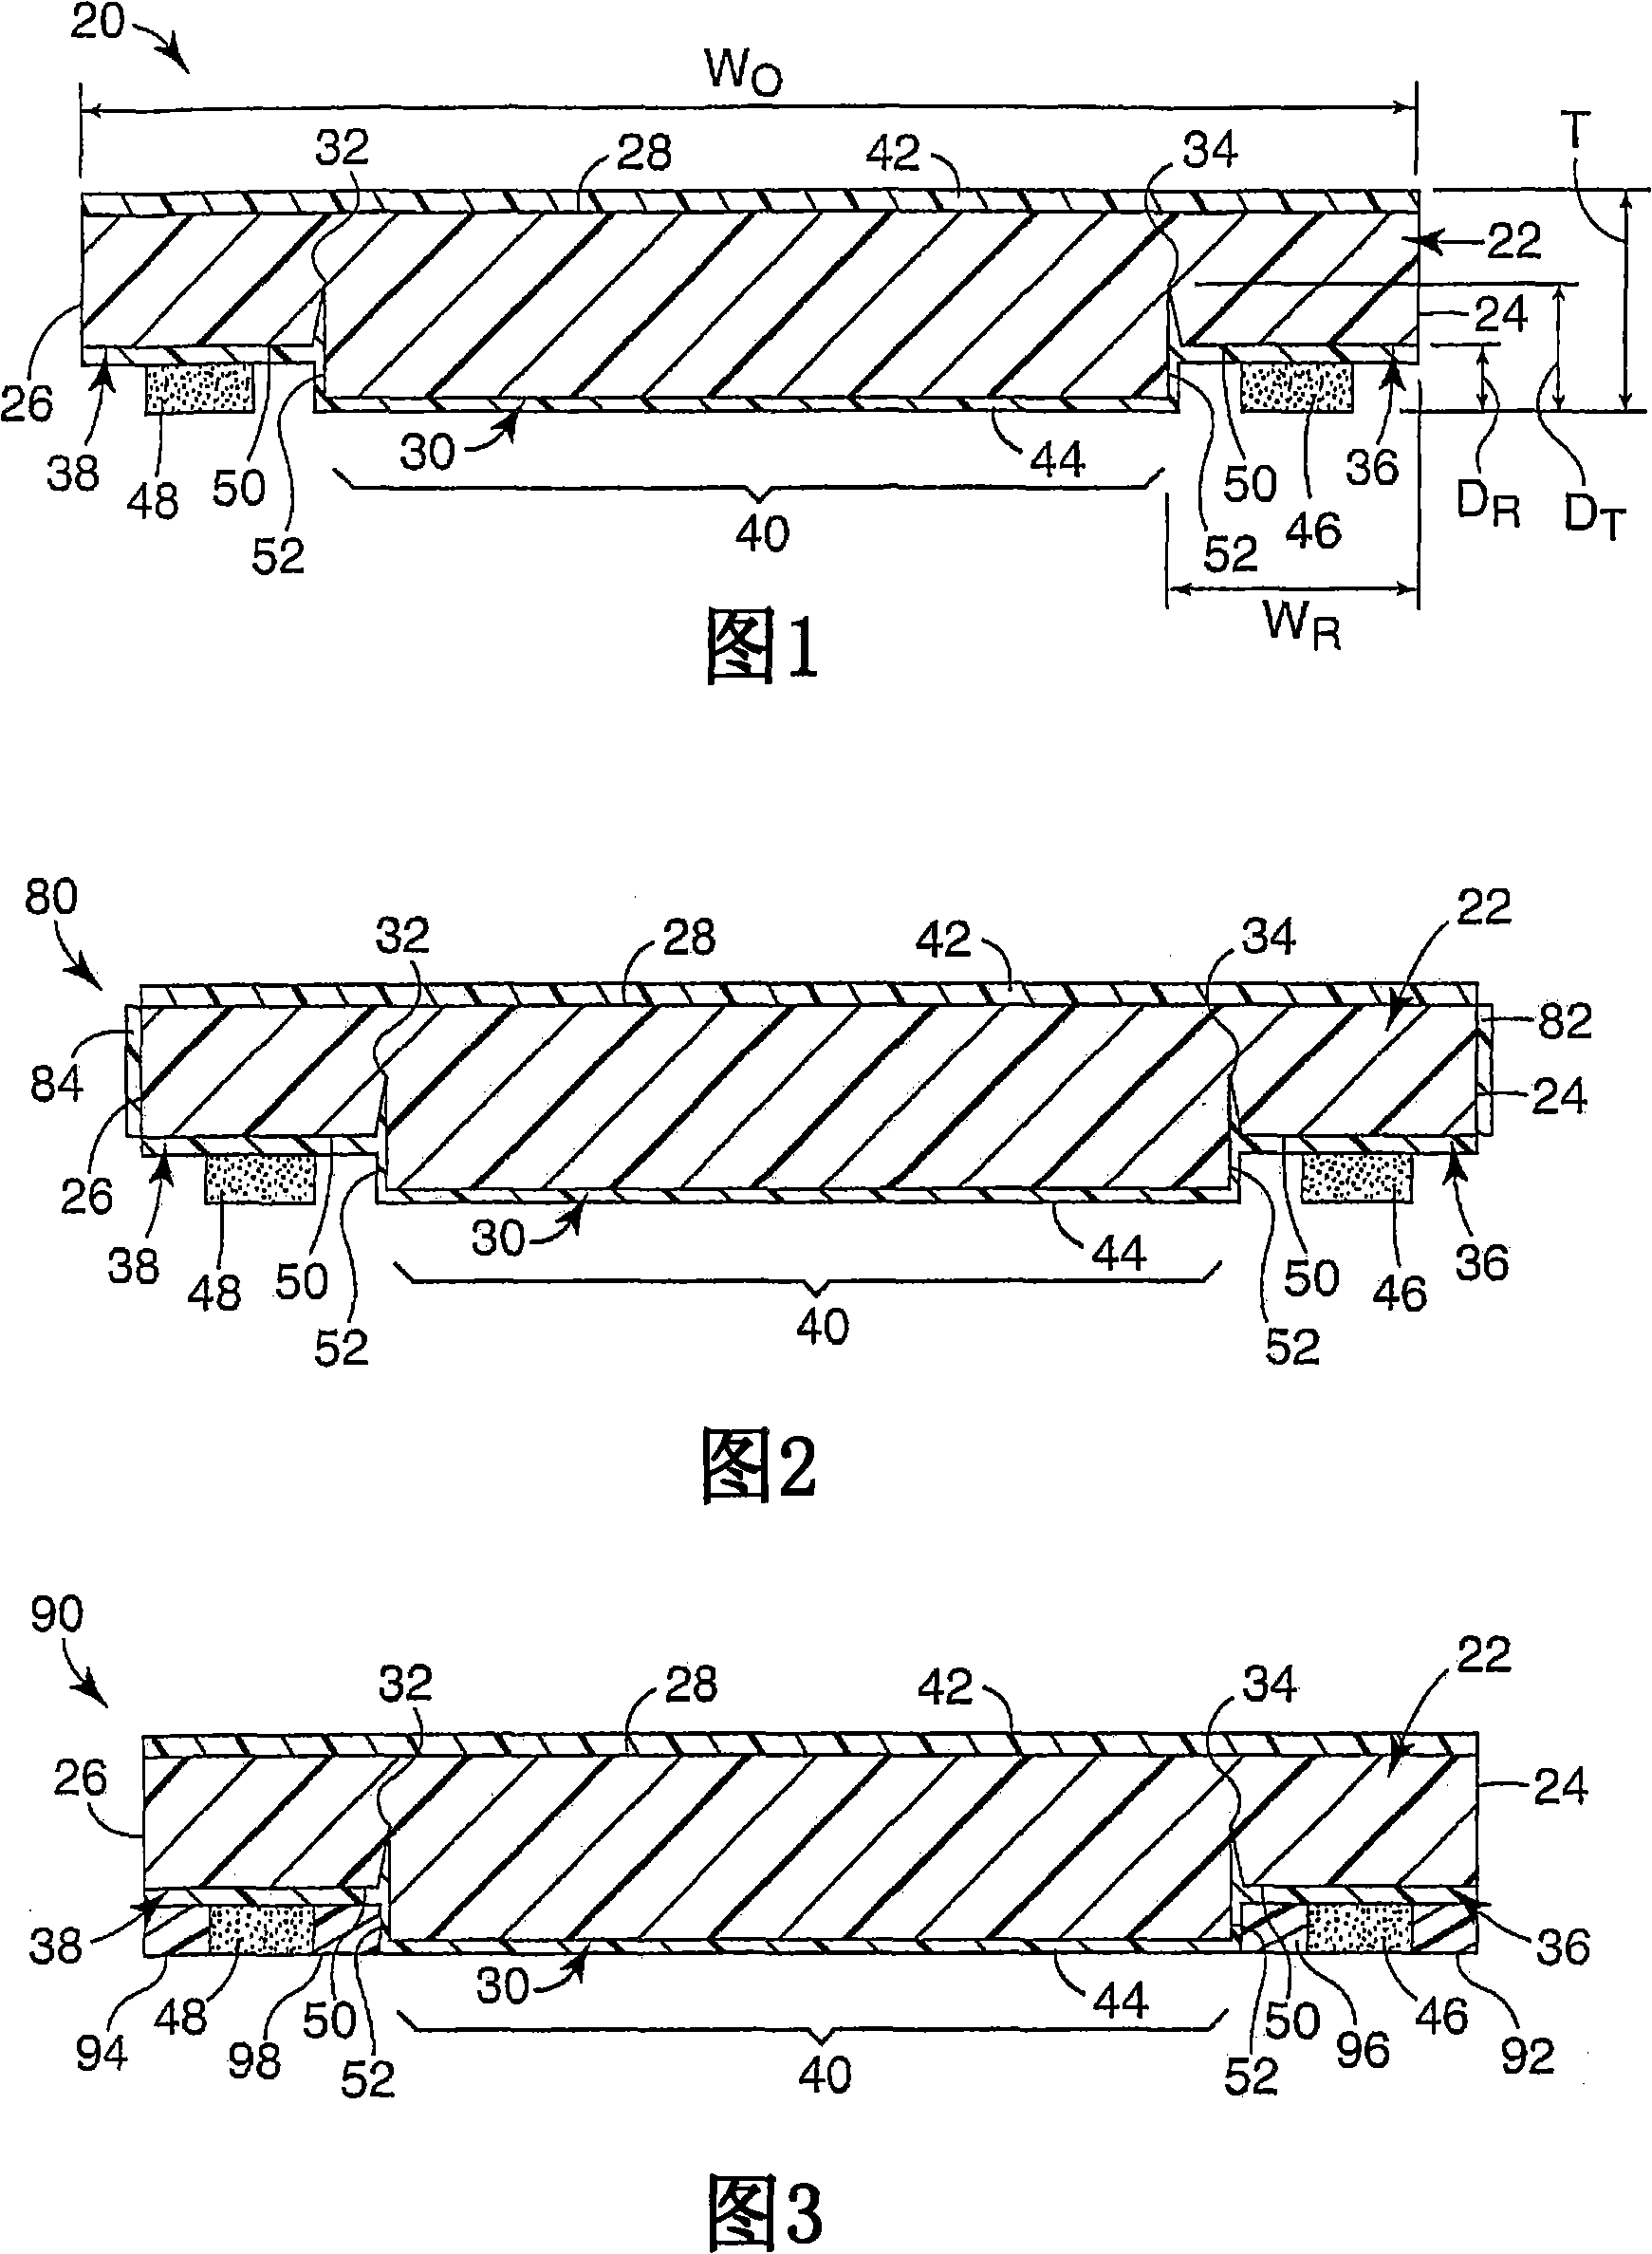 Cover tape and method for manufacture